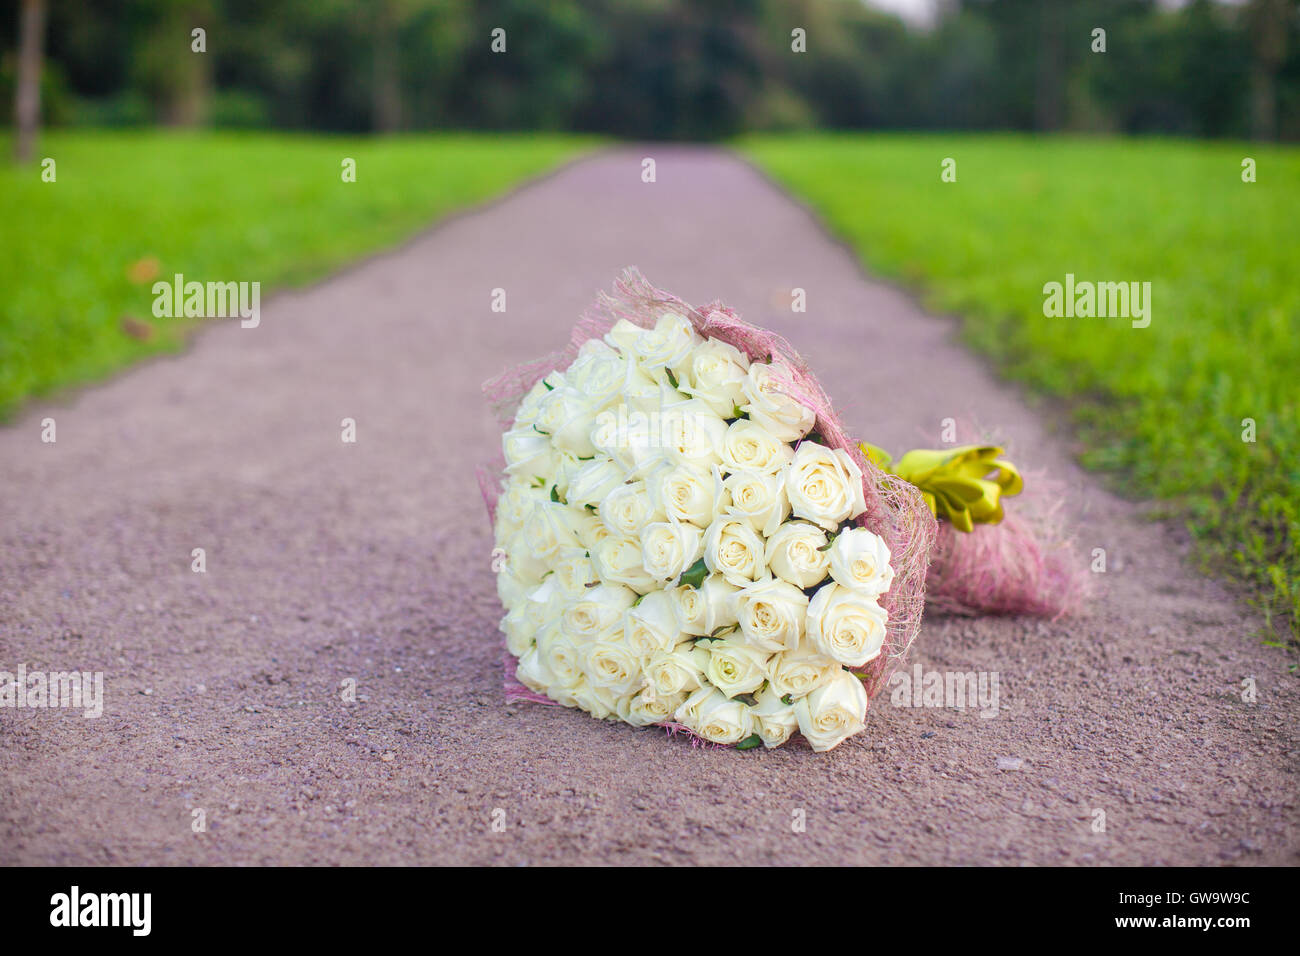 Incredibly beautiful large bouquet of white roses on a sandy path in the garden Stock Photo